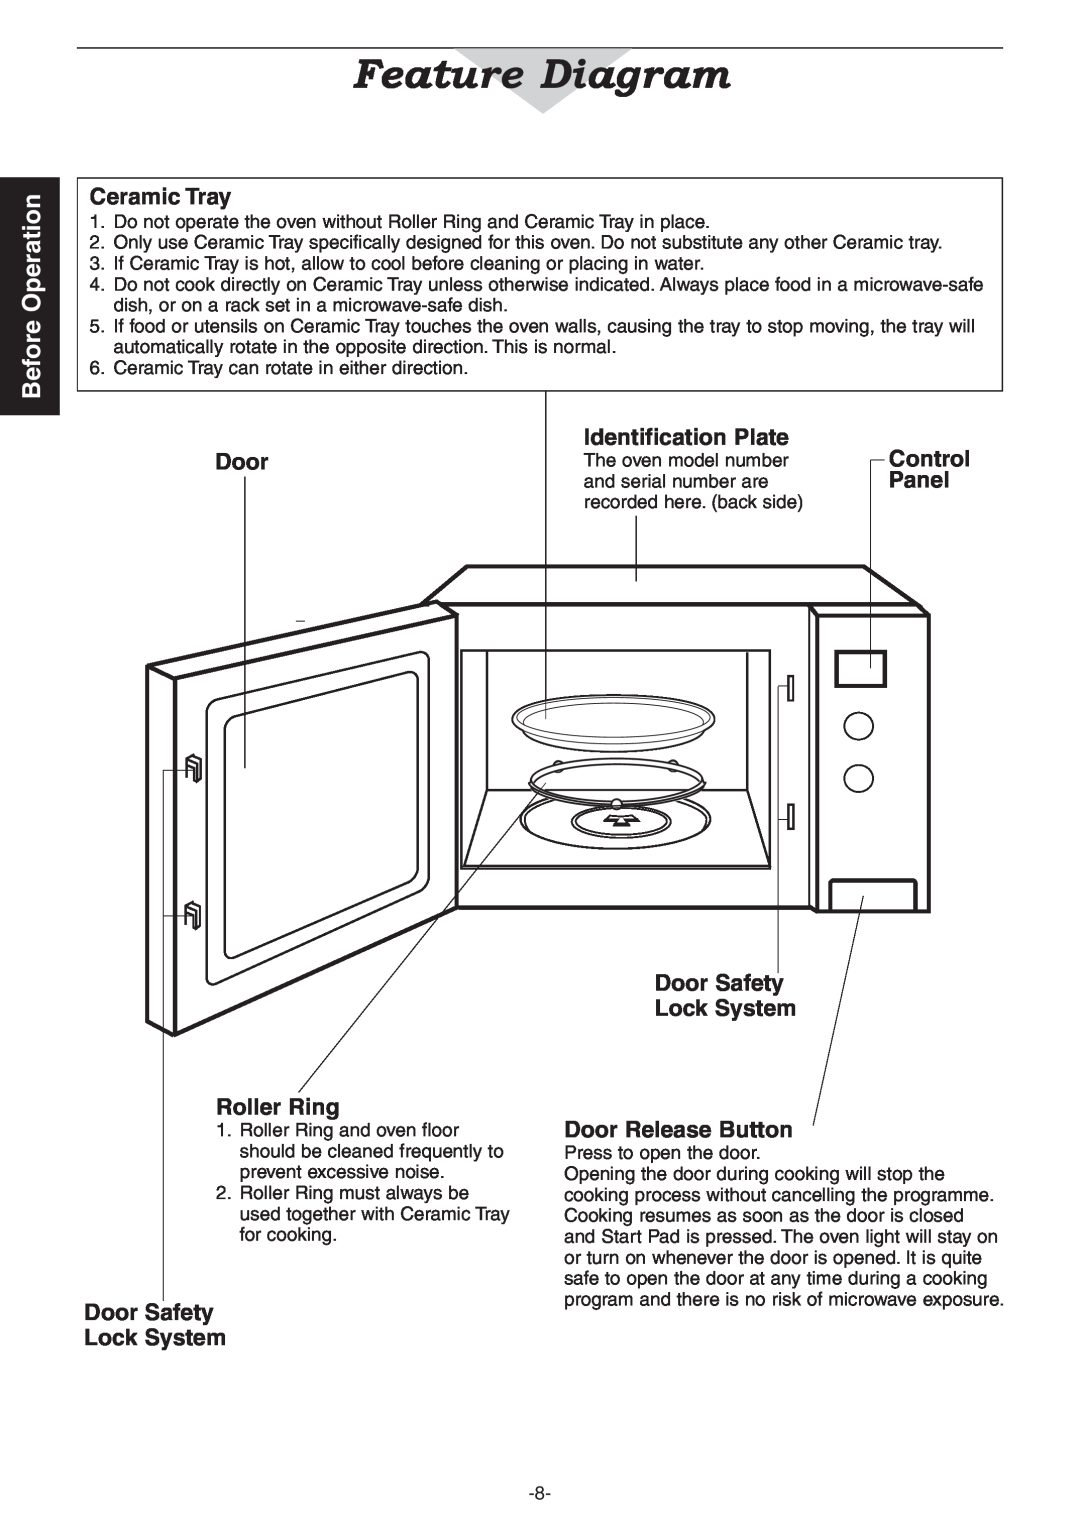 Panasonic NN-CD987W Feature Diagram, Before Operation, Ceramic Tray, Door, Identification Plate, Panel, Roller Ring 